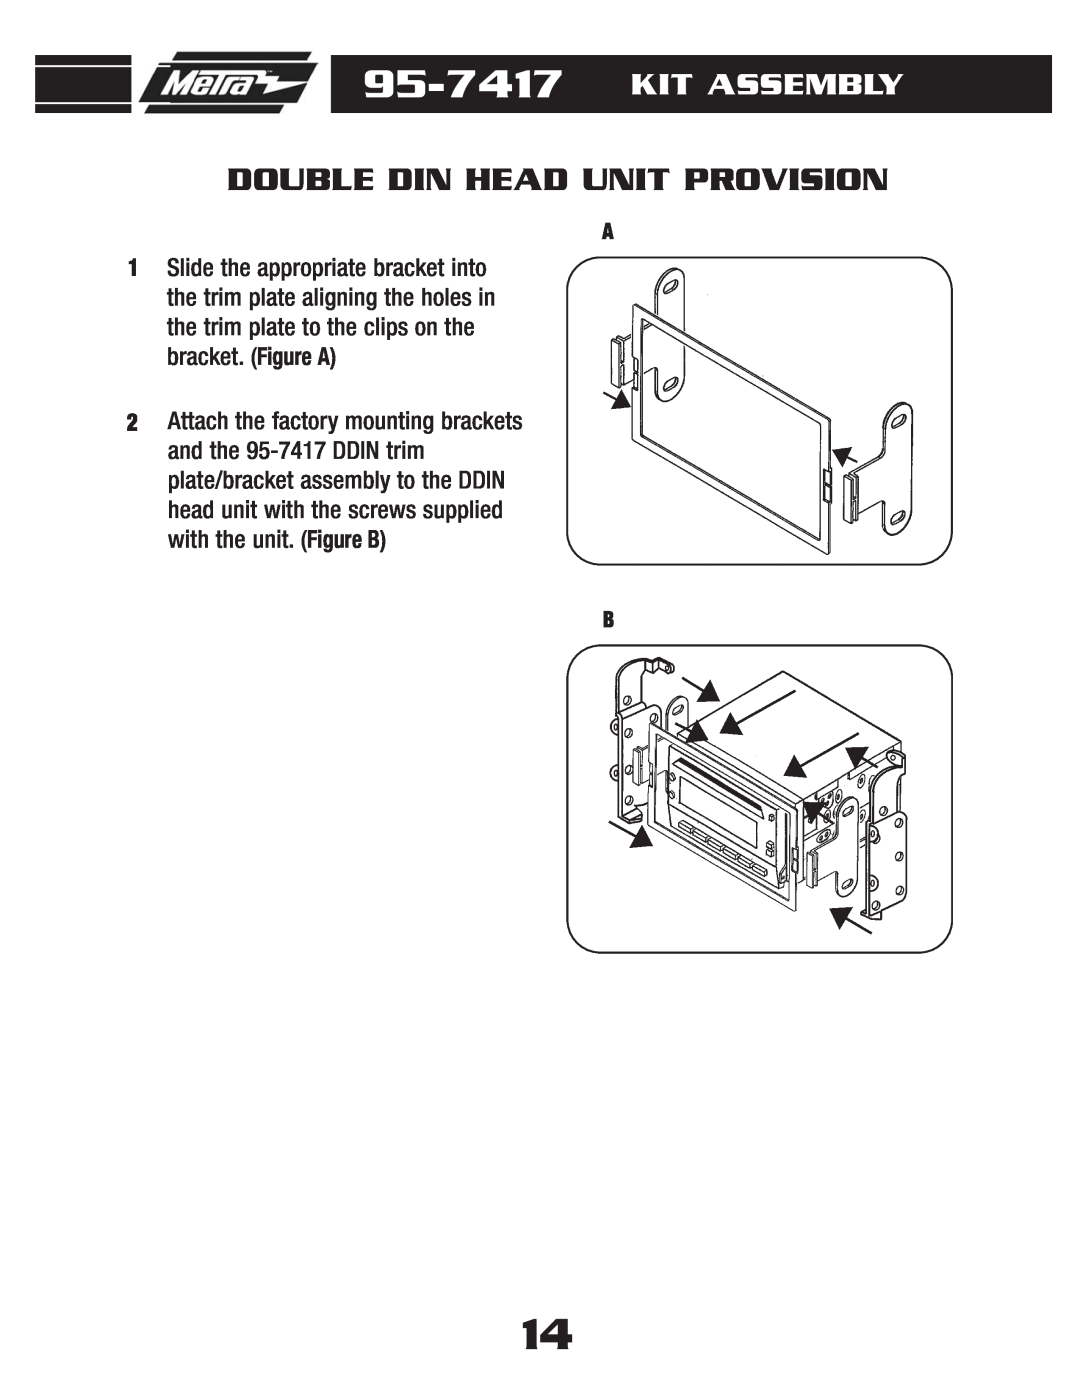 Metra Electronics 95-7417 installation instructions Double Din Head Unit Provision, Kit Assembly 